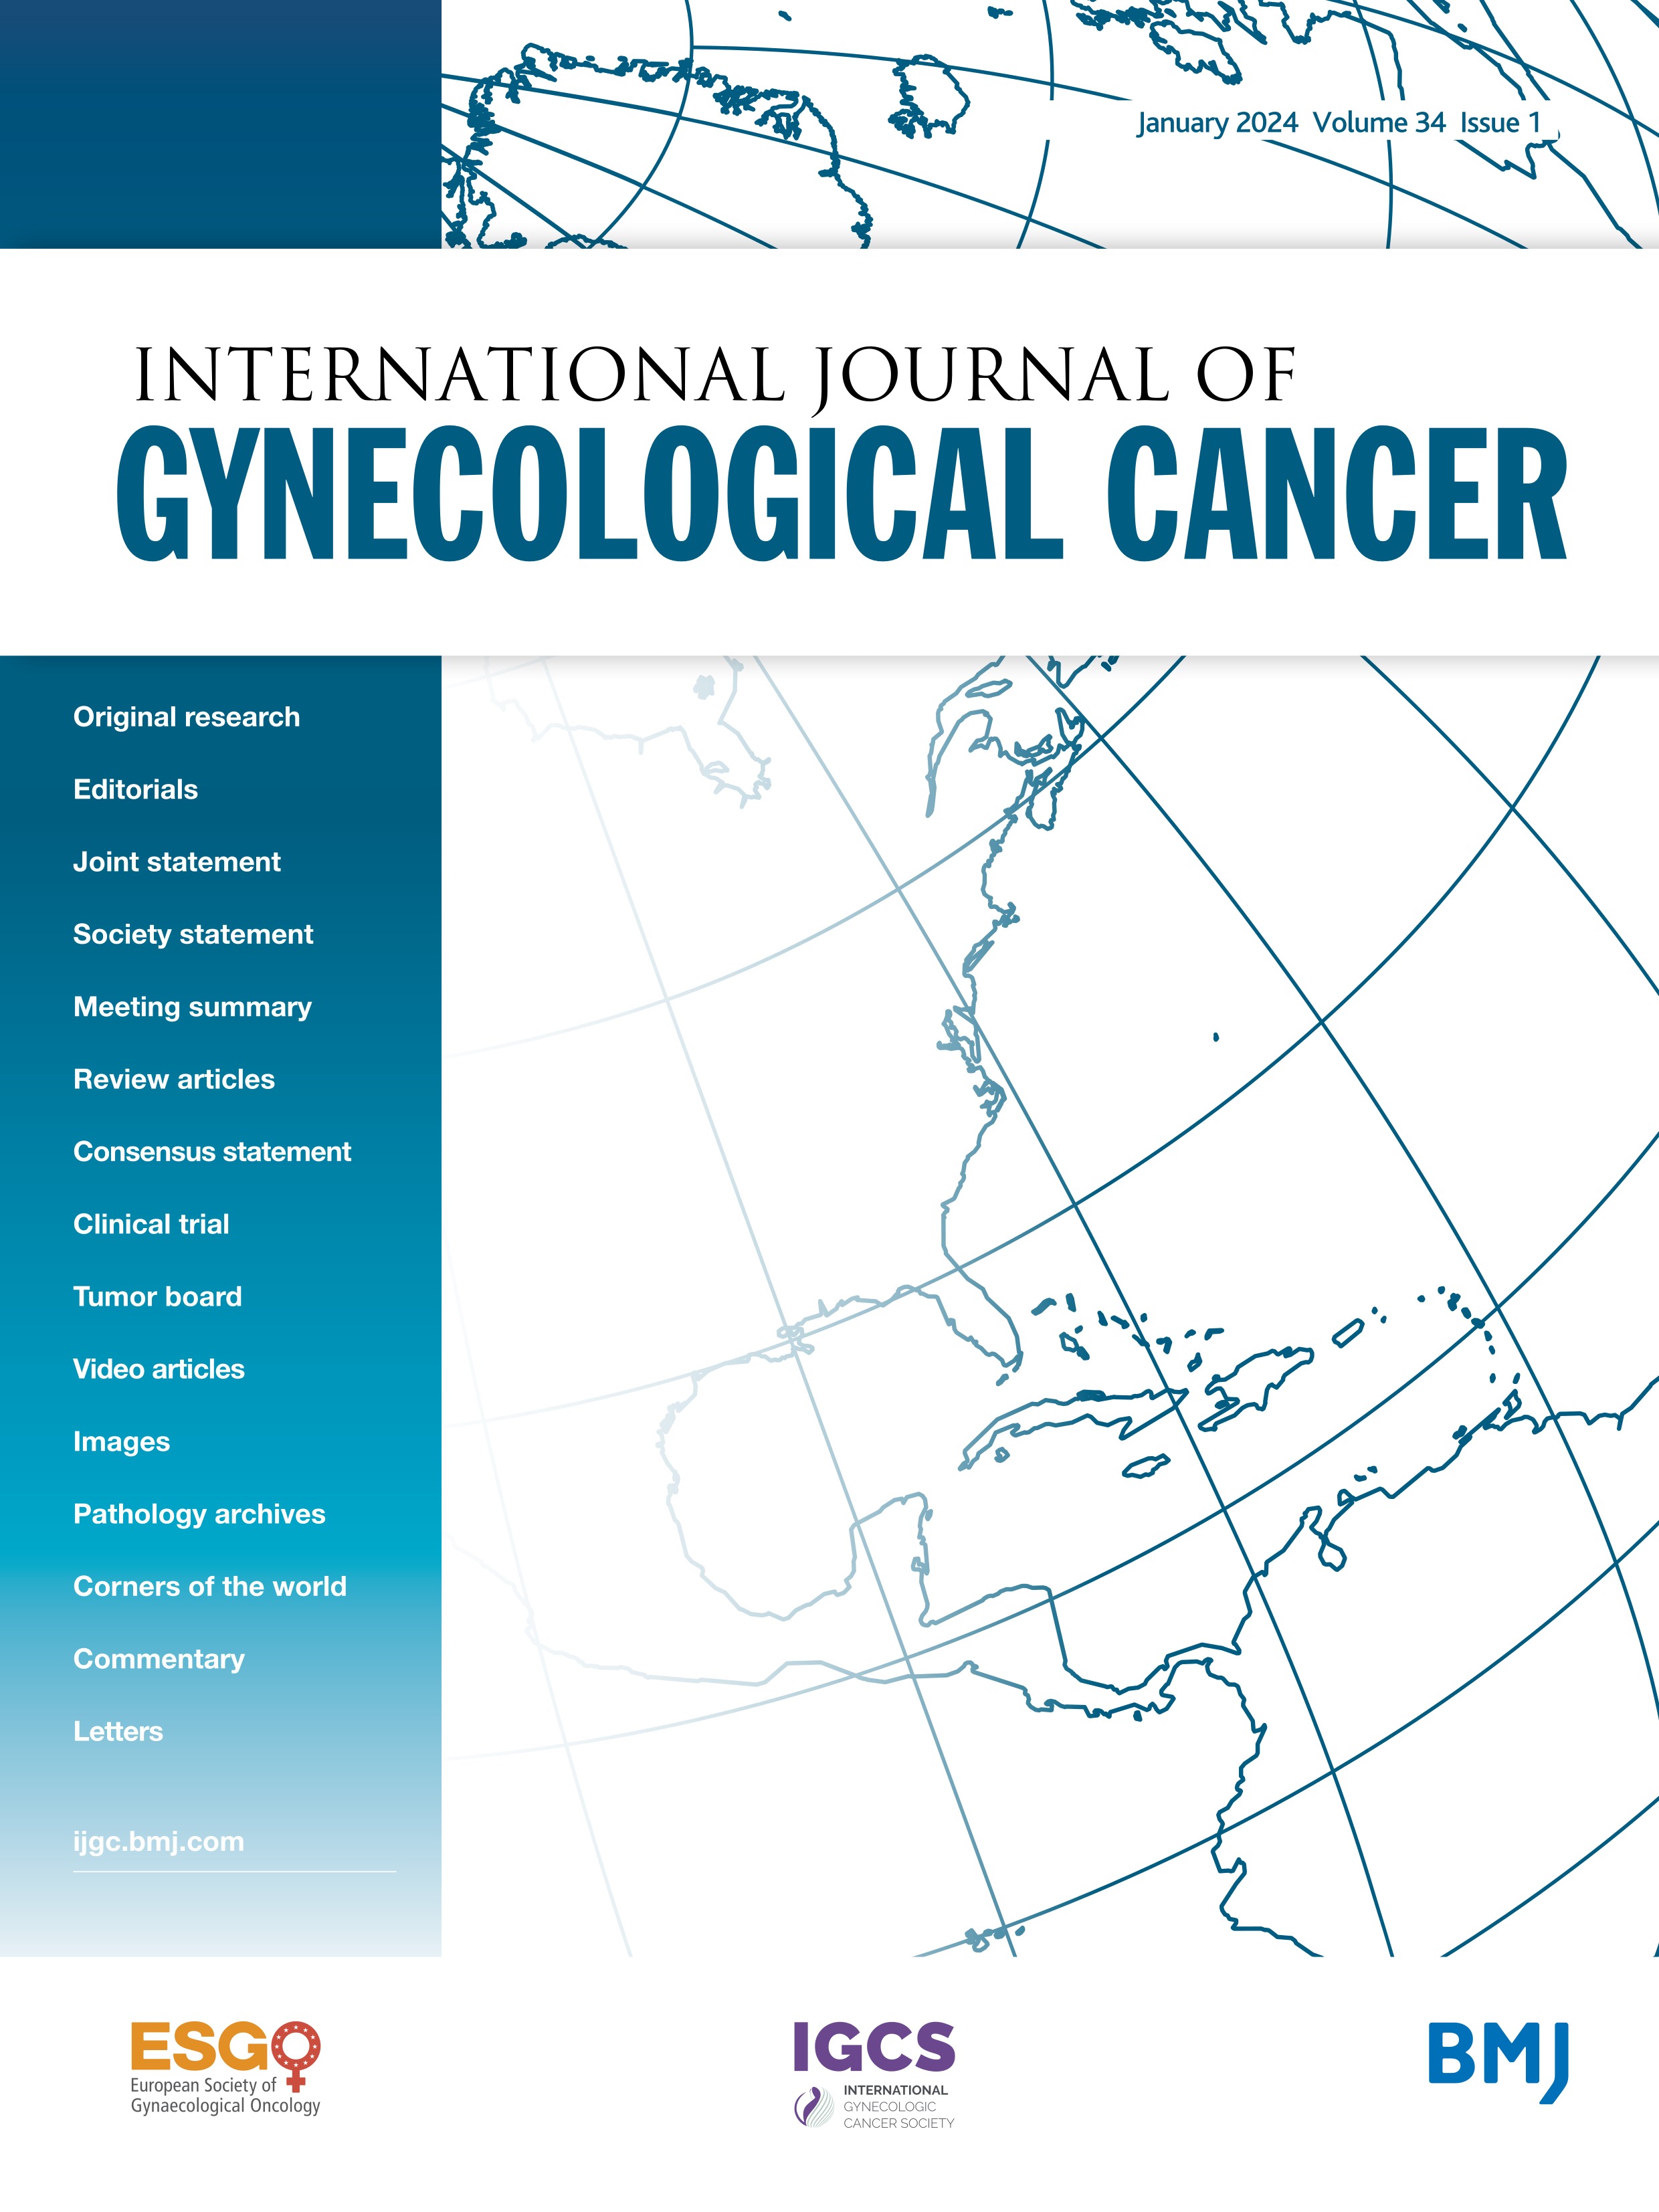 Impact of delayed interval cytoreductive surgery on the survival of patients with advanced stage high-grade epithelial ovarian carcinoma